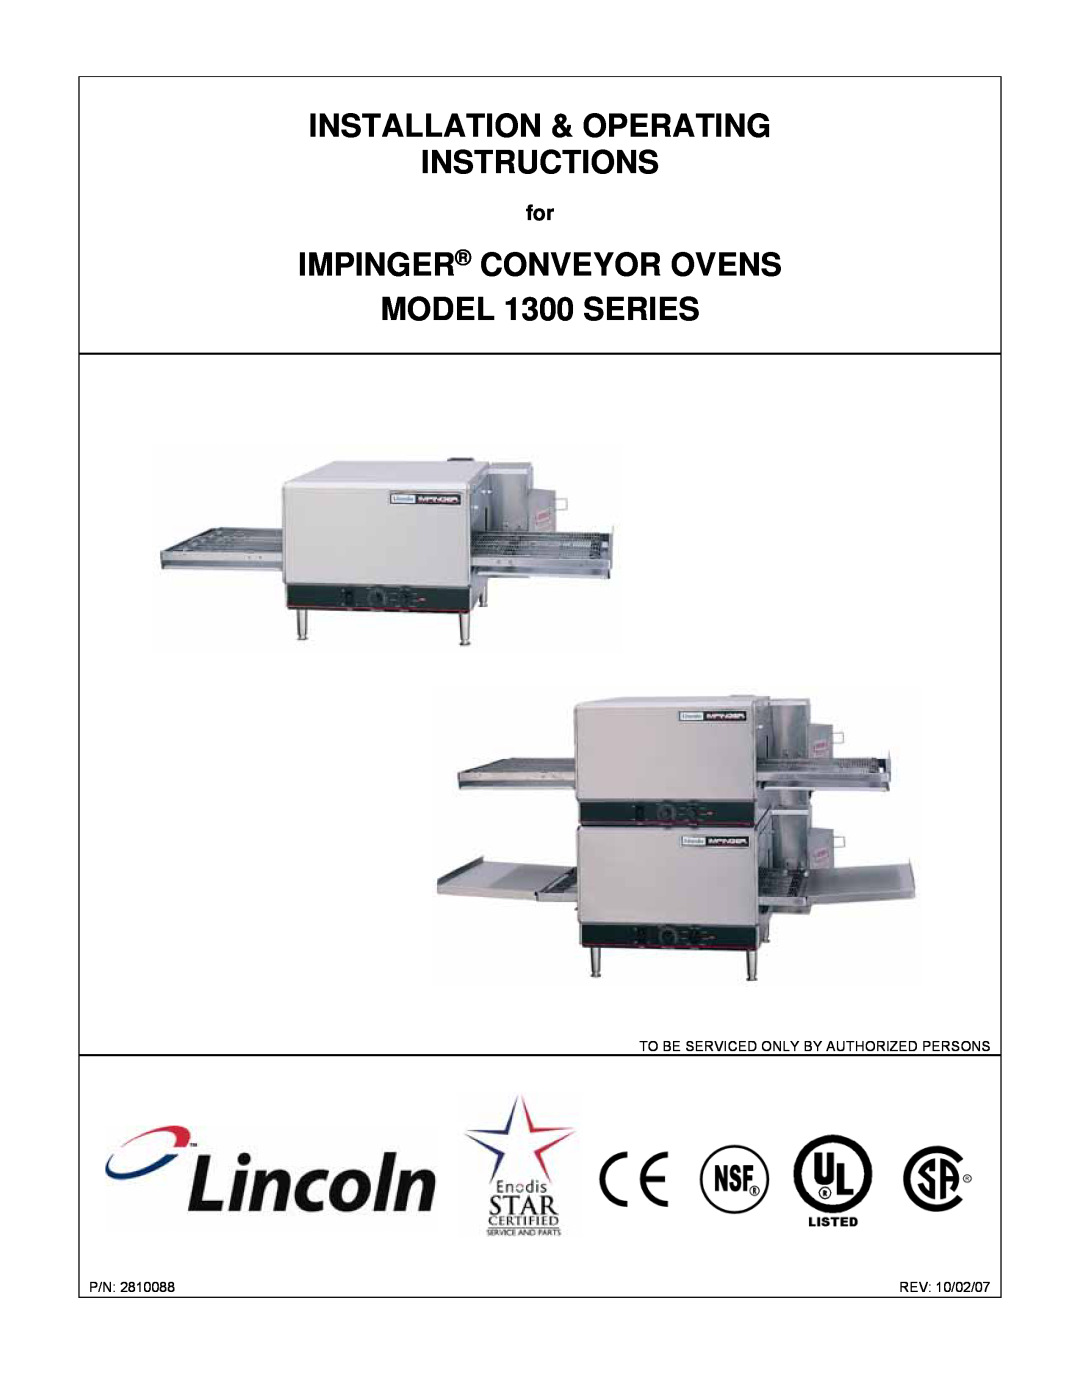 Lincoln operating instructions Installation & Operating Instructions, IMPINGER CONVEYOR OVENS MODEL 1300 SERIES 